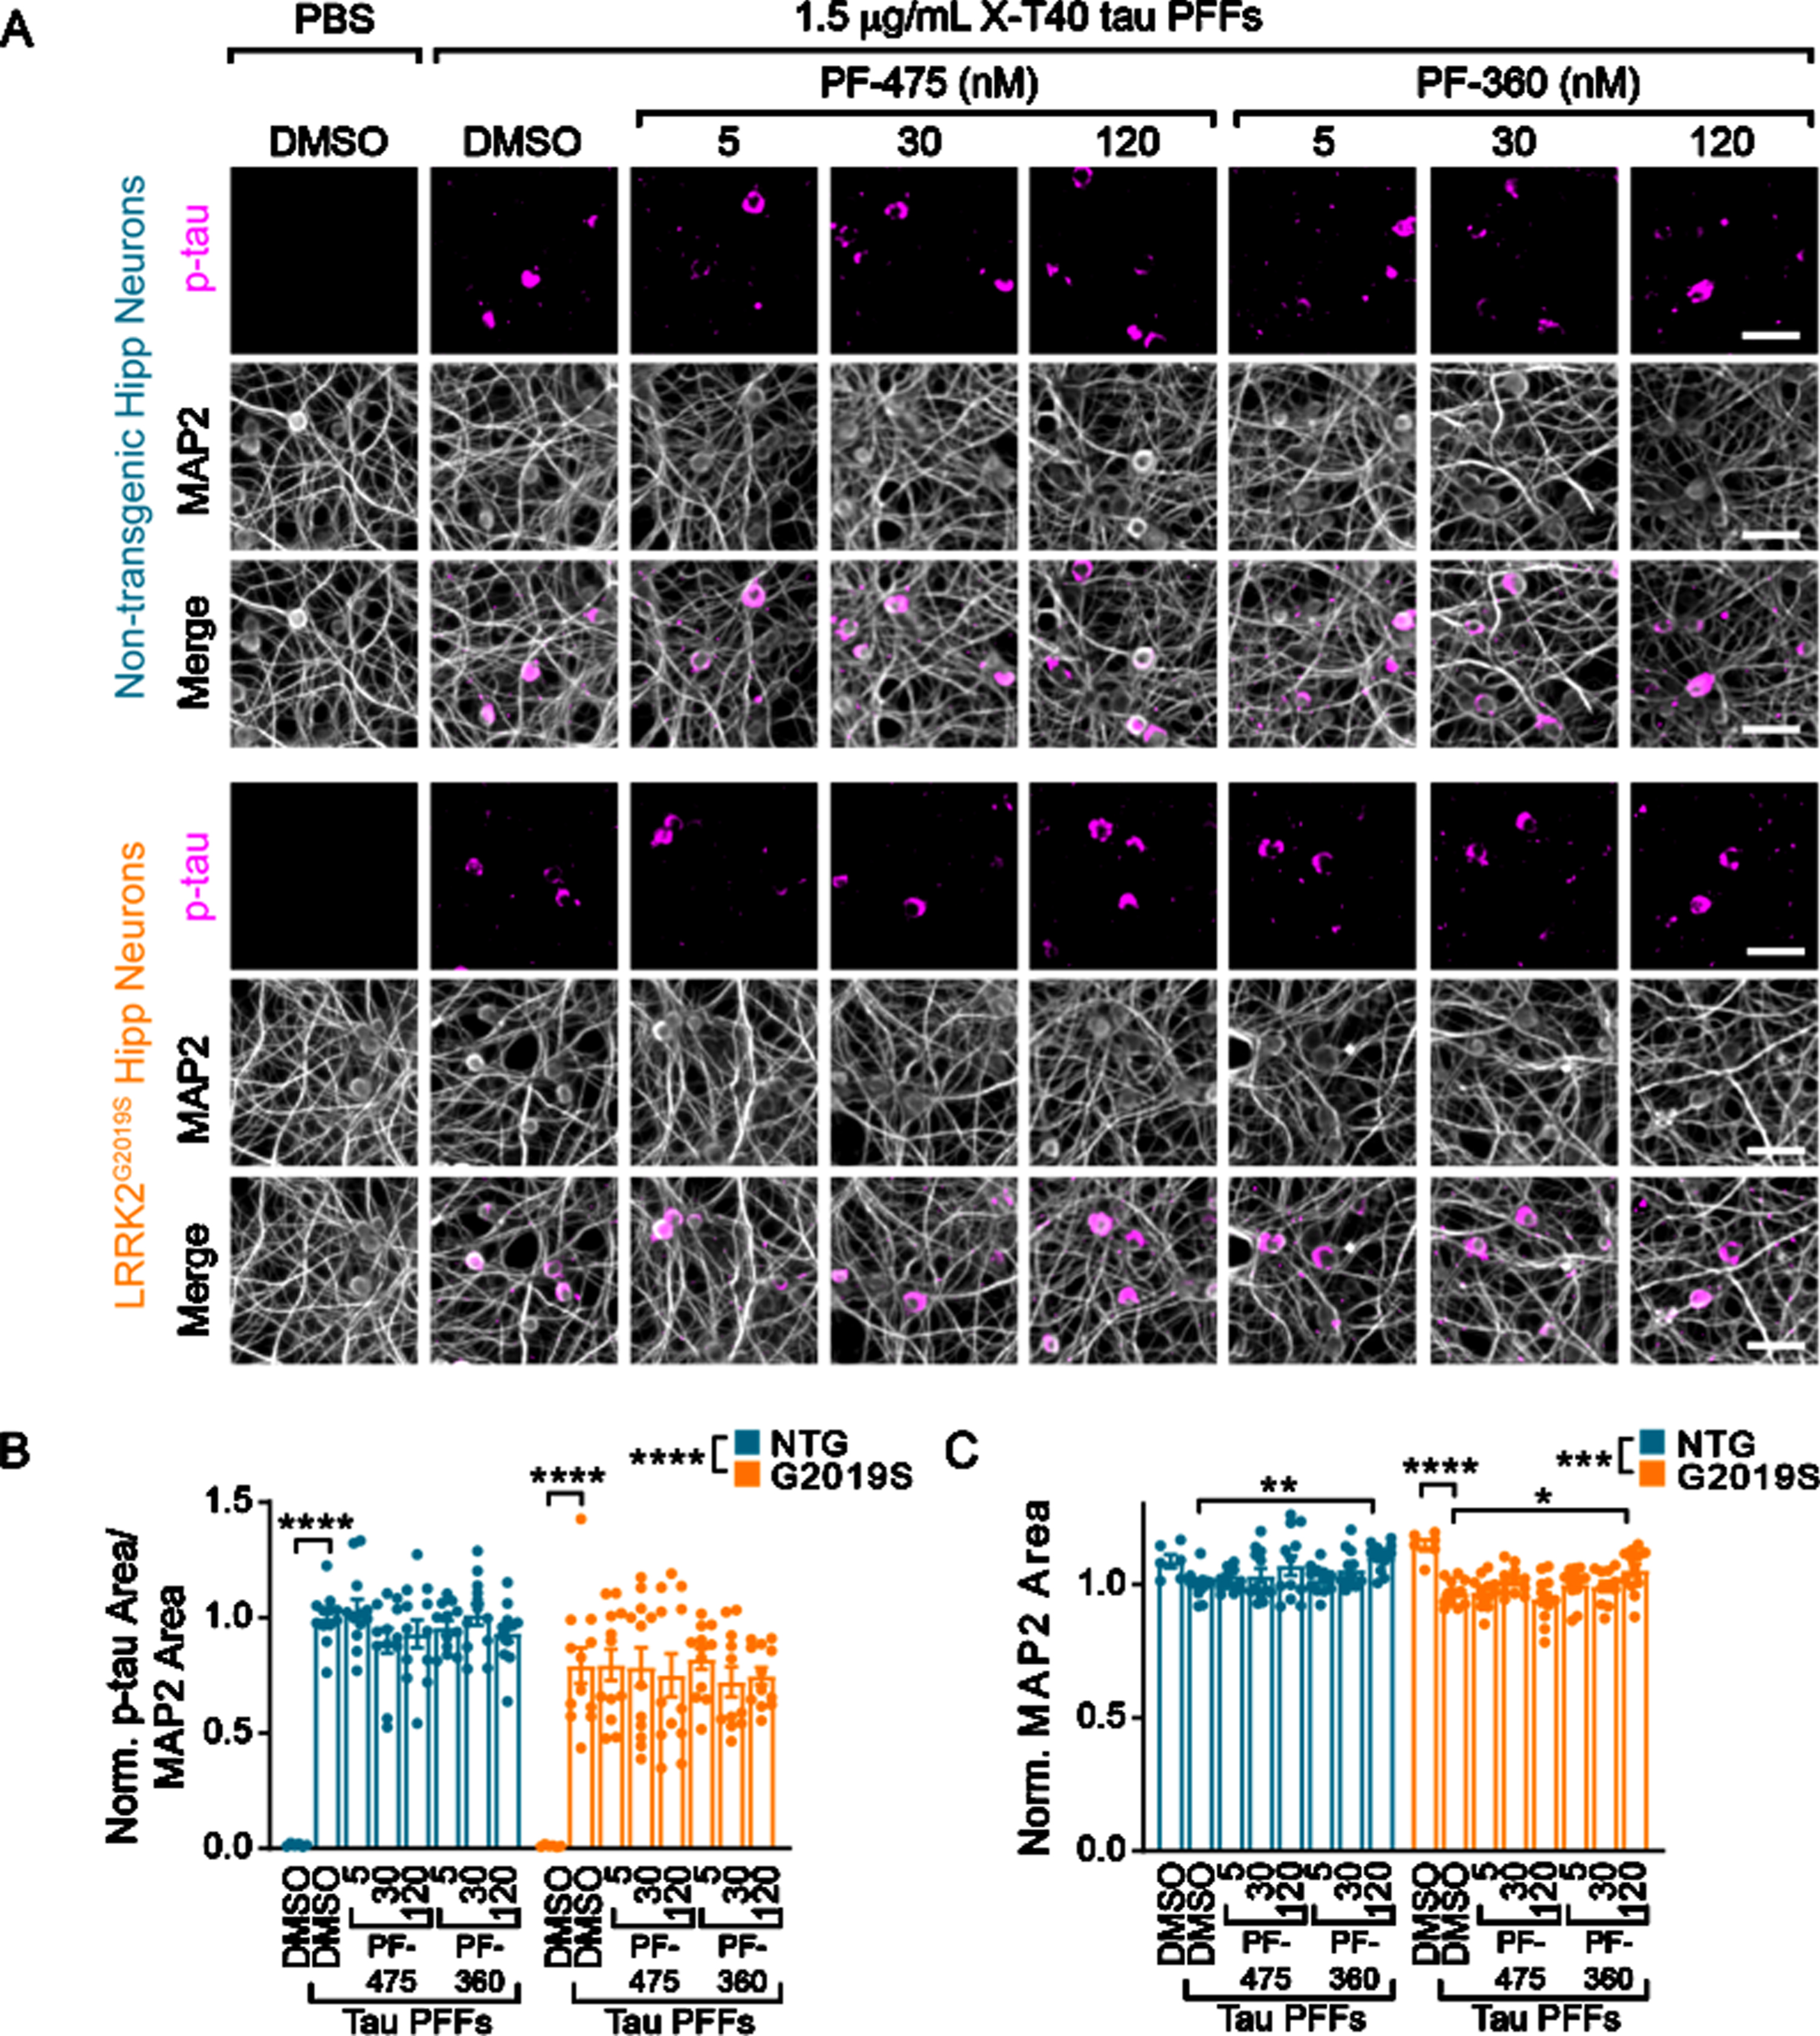 Wildtype and LRRK2G2019S neurons exhibit robust, inhibitor-insensitive tau pathology. A) Primary hippocampal neurons from NTG or LRRK2G2019S mice were treated with vehicle or LRRK2 inhibitors at the noted concentrations at 5 DIV. They were further treated with X-T40 tau PFFs at 1.5μg/mL at 7 DIV and fixed and stained for pS202/T205 tau (AT8, magenta) and MAP2 (gray) at 21 DIV. Scale bar = 50μm. B) Quantification of the pS202/T205 tau area normalized to MAP2 area and further normalized to NTG-DMSO-PFF. LRRK2G2019S neurons showed a small, genotype-level significant reduction in tau pathology, and each genotype showed no tau pathology without addition of X-T40 tau PFFs (Two-way ANOVA; genotype effect ****p < 0.0001, Dunnett’s multiple comparison test within genotype: NTG: DMSO-PFF vs. DMSO****p < 0.0001; G2019S: DMSO-PFF vs. DMSO ****p < 0.0001; All other values were not statistically significant). C) Quantification of the MAP2 area also showed a small genotype-level significant change as well as a reduction related to PFF treatment. Interestingly, the highest dose of PF-360 also elevated MAP2 area slightly (Two-way ANOVA; genotype effect ***p = 0.001, Dunnett’s multiple comparison test within genotype: NTG: DMSO-PFF vs. 120 nM PF-360-PFF **p = 0.0027; G2019S: DMSO-PFF vs. DMSO ****p < 0.0001; DMSO-PFF vs. 120 nM PF-360 *p = 0.0216; All other values were not statistically significant). n (separate cultures) = 7-8 independent samples/group. Data are represented as mean±SEM with individual data points plotted.